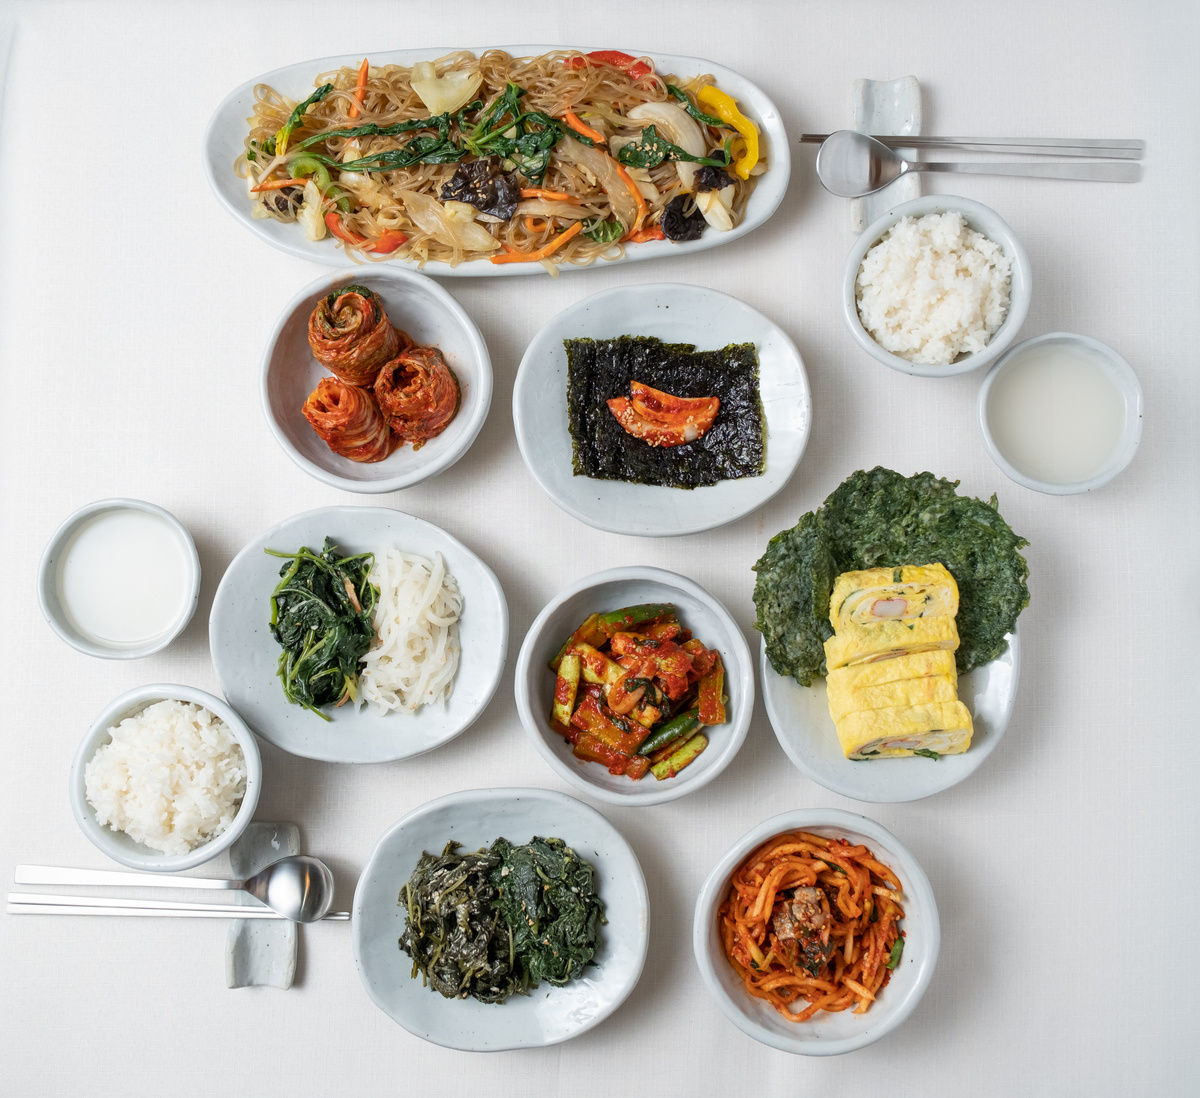 Assorted Side Dishes, Japchae, Mackgeolli and Rice on Table